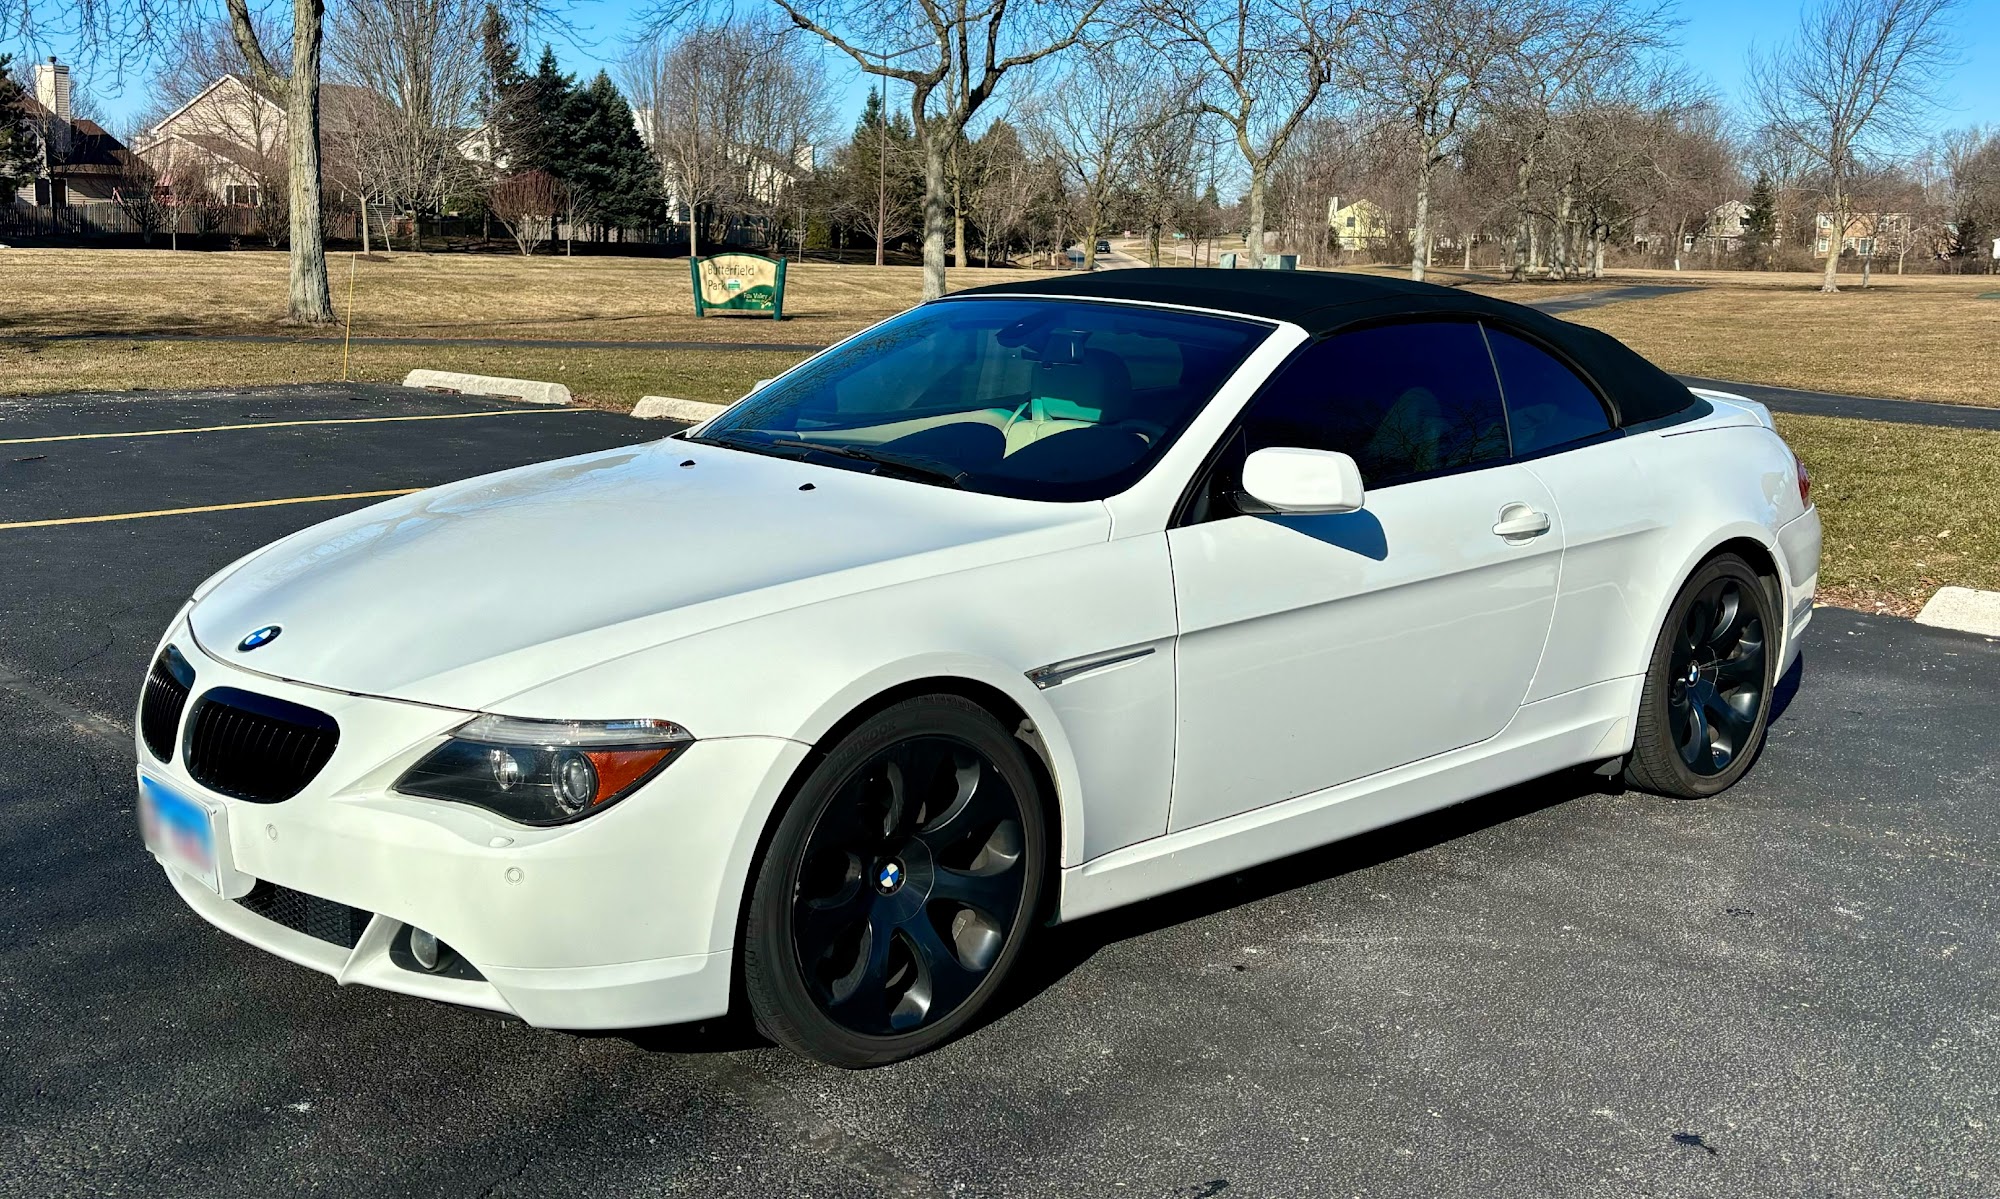 Chicago Professional Window Tinting 30 E Plainfield Rd, Countryside Illinois 60525